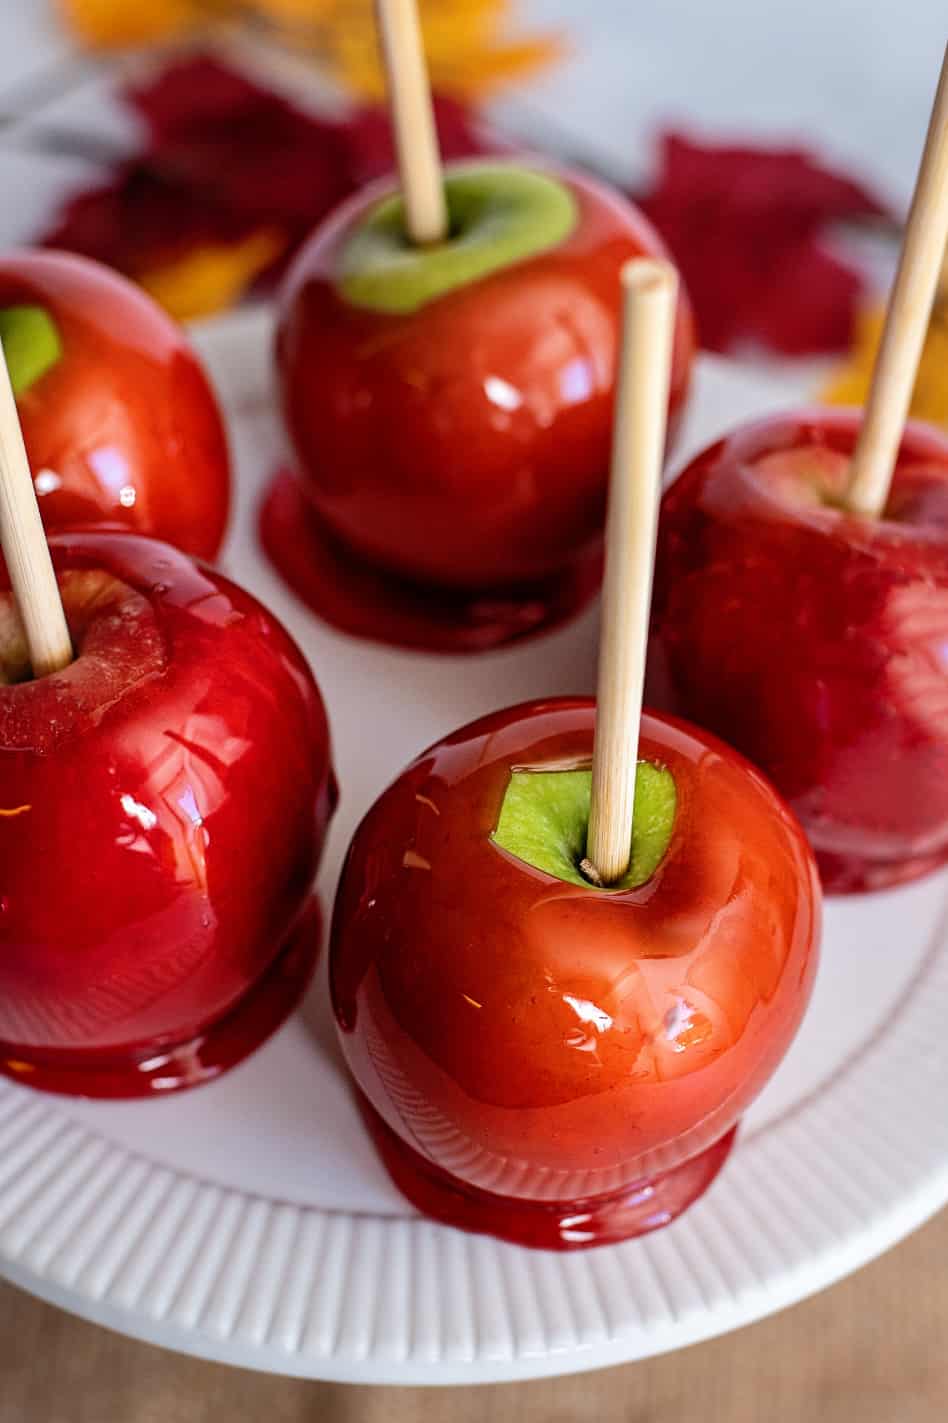 Plate of candy apples.